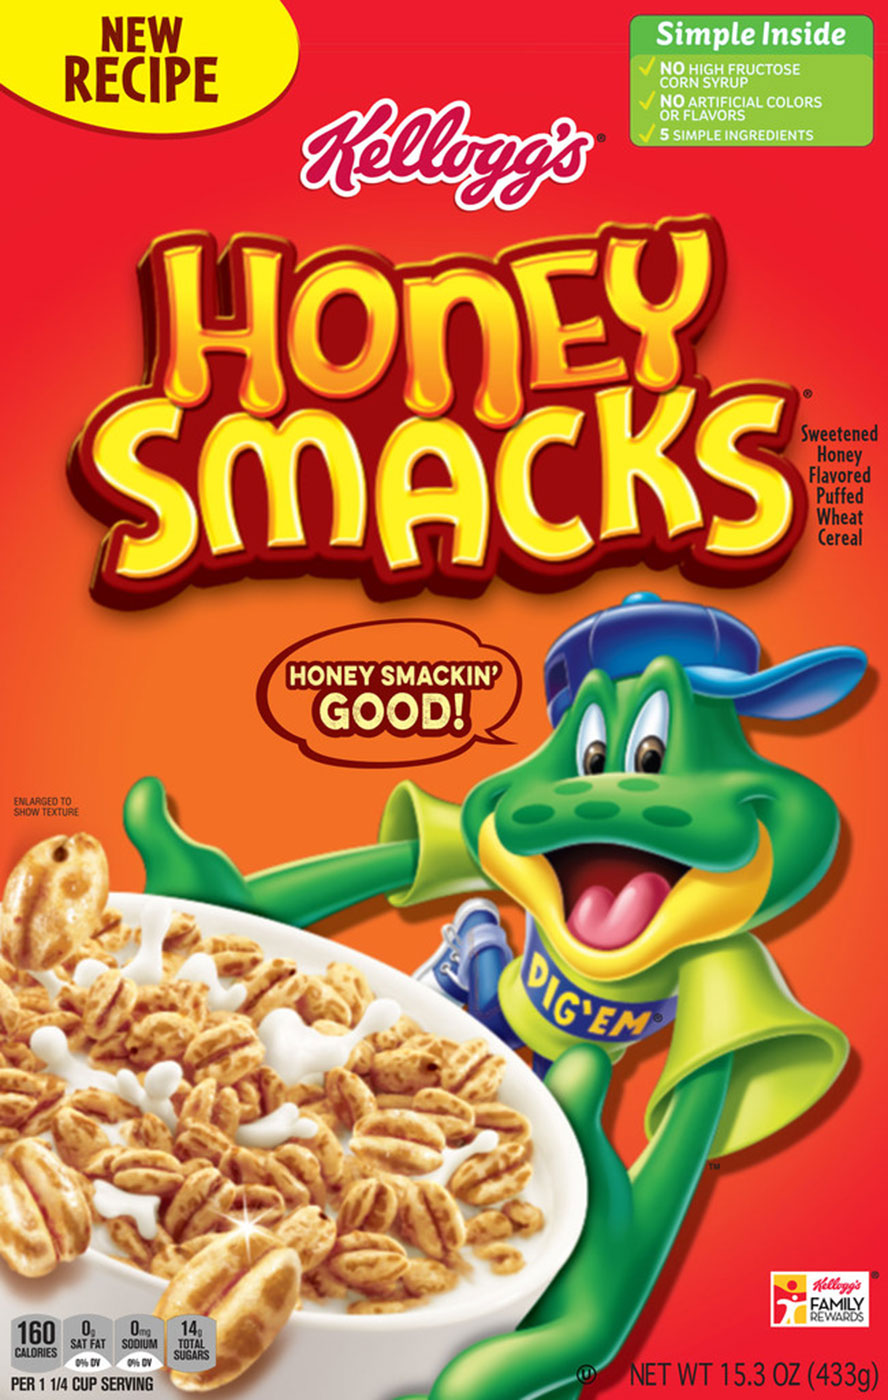 Honey Smacks Returns to Supermarket Shelves After Salmonella Scare; Twitter Reacts